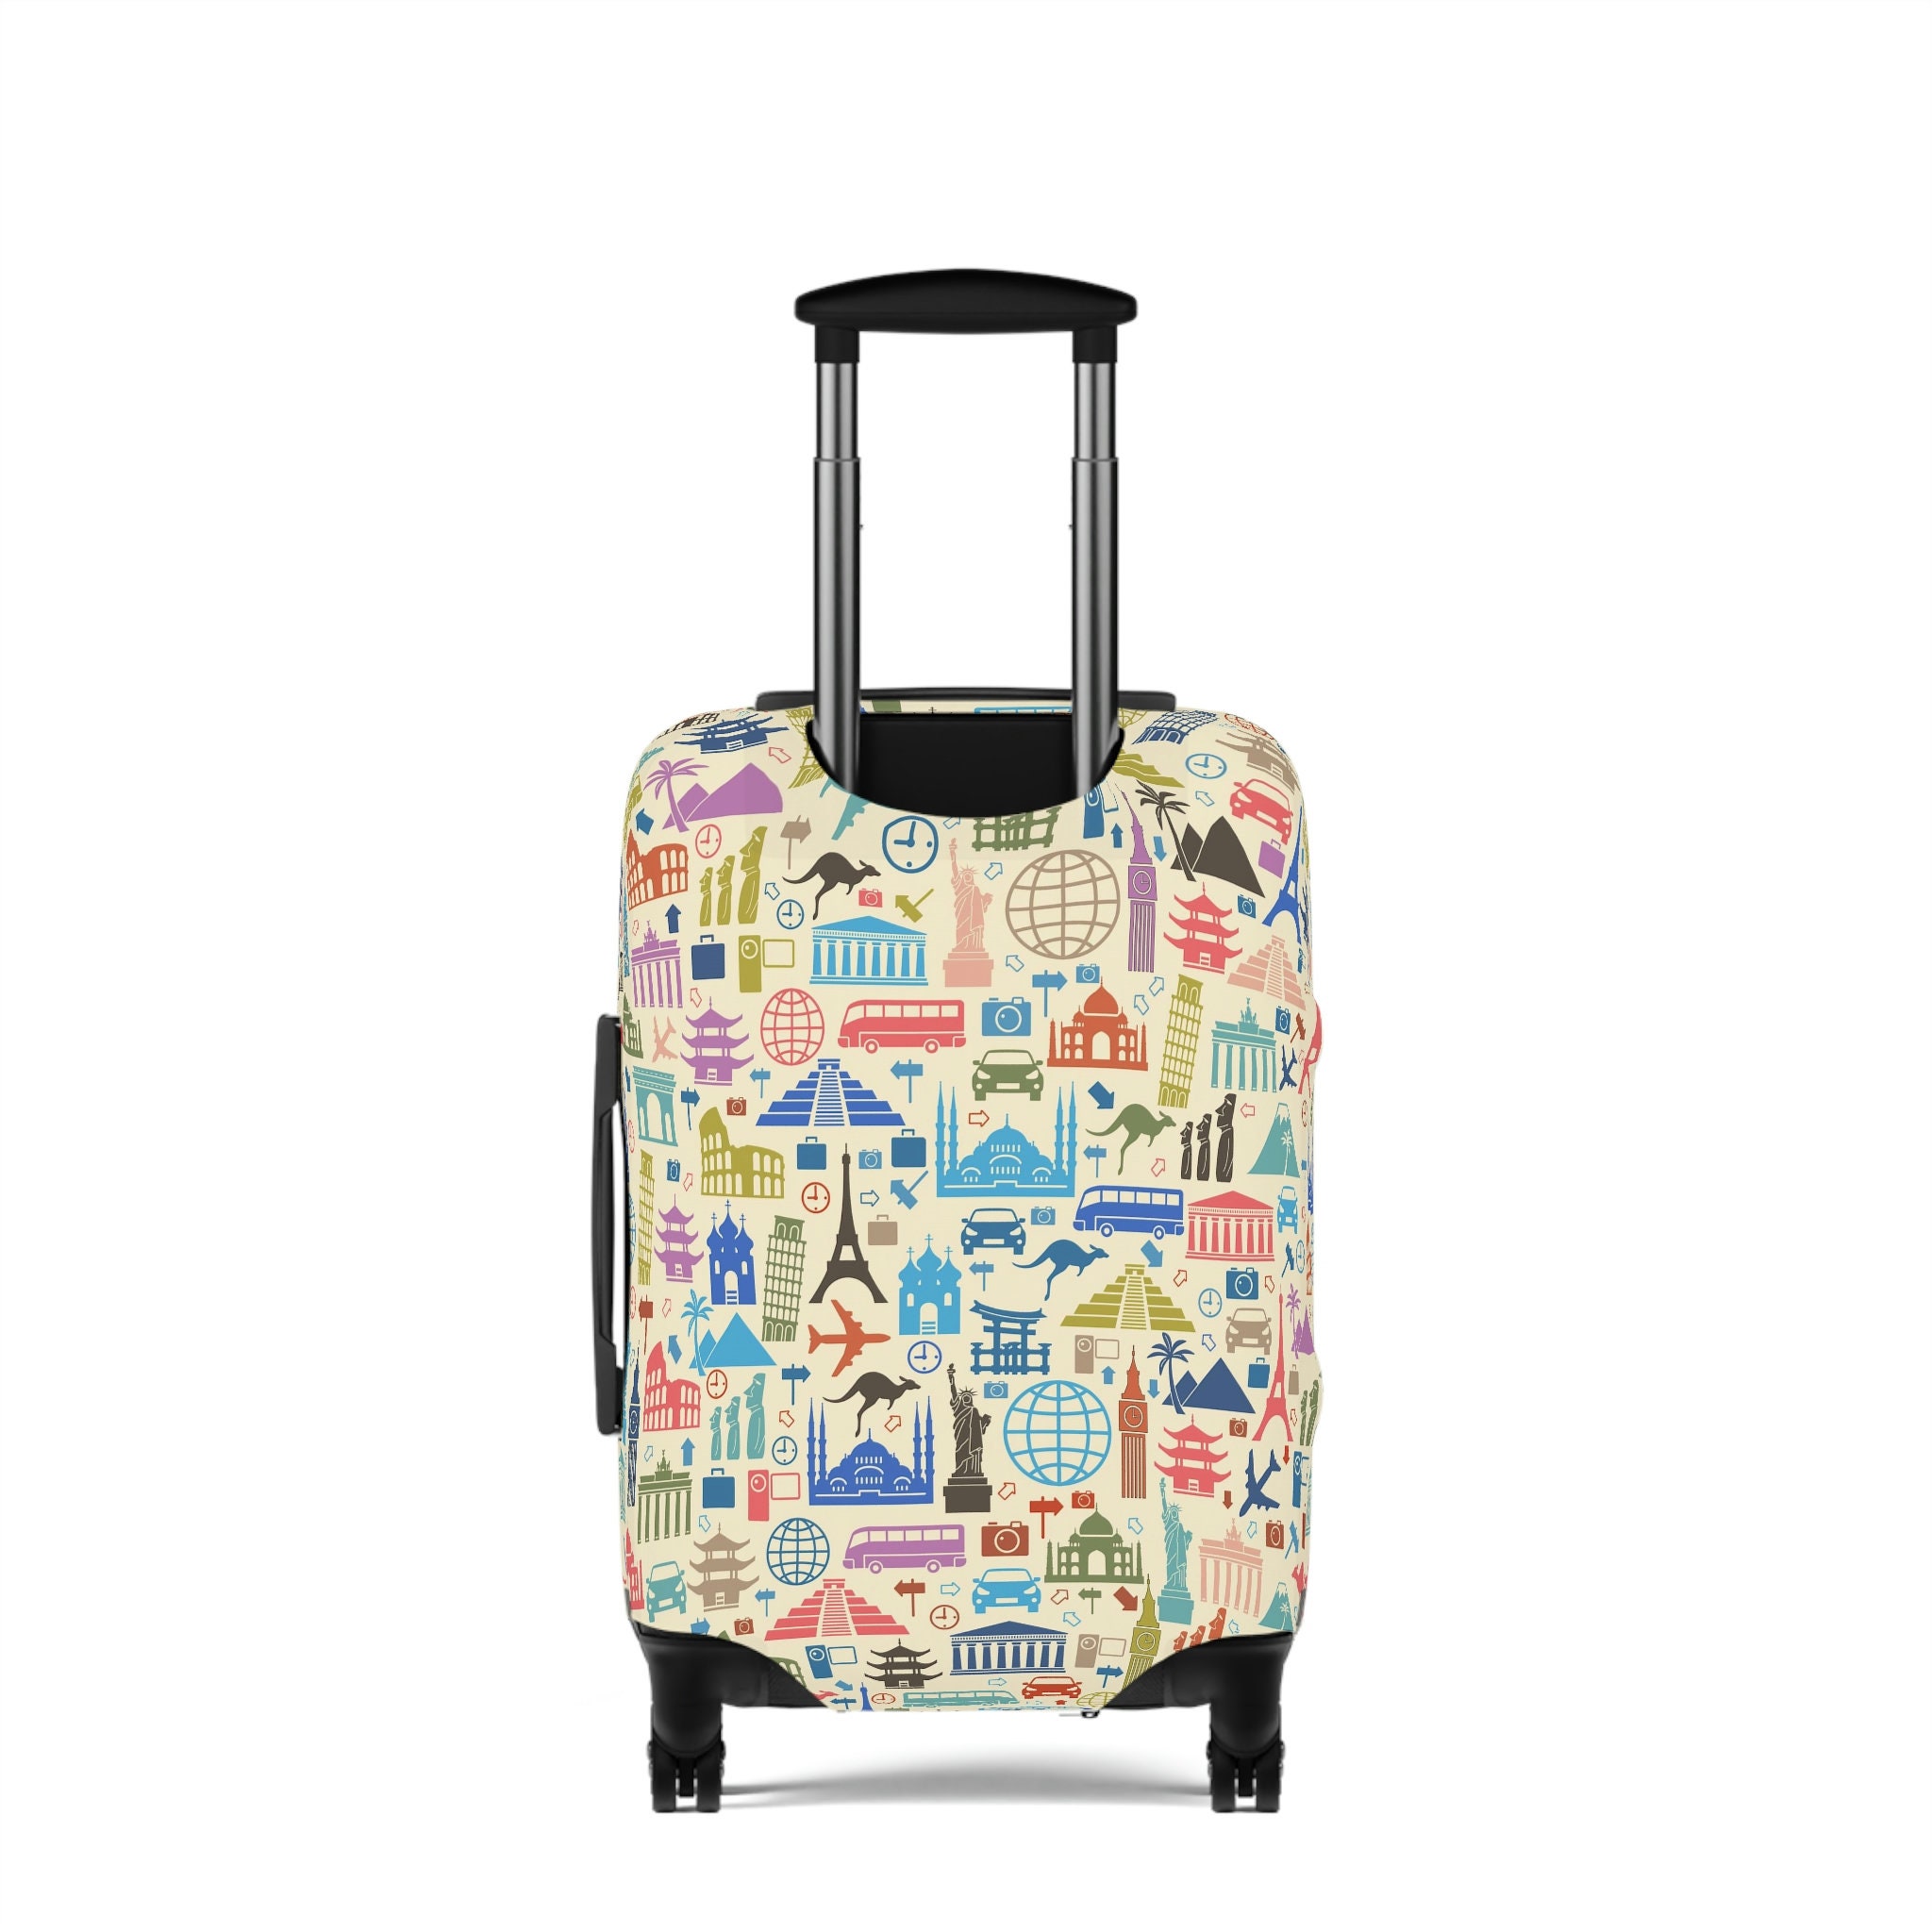 Vacation travels Custom Designed Luggage Cover